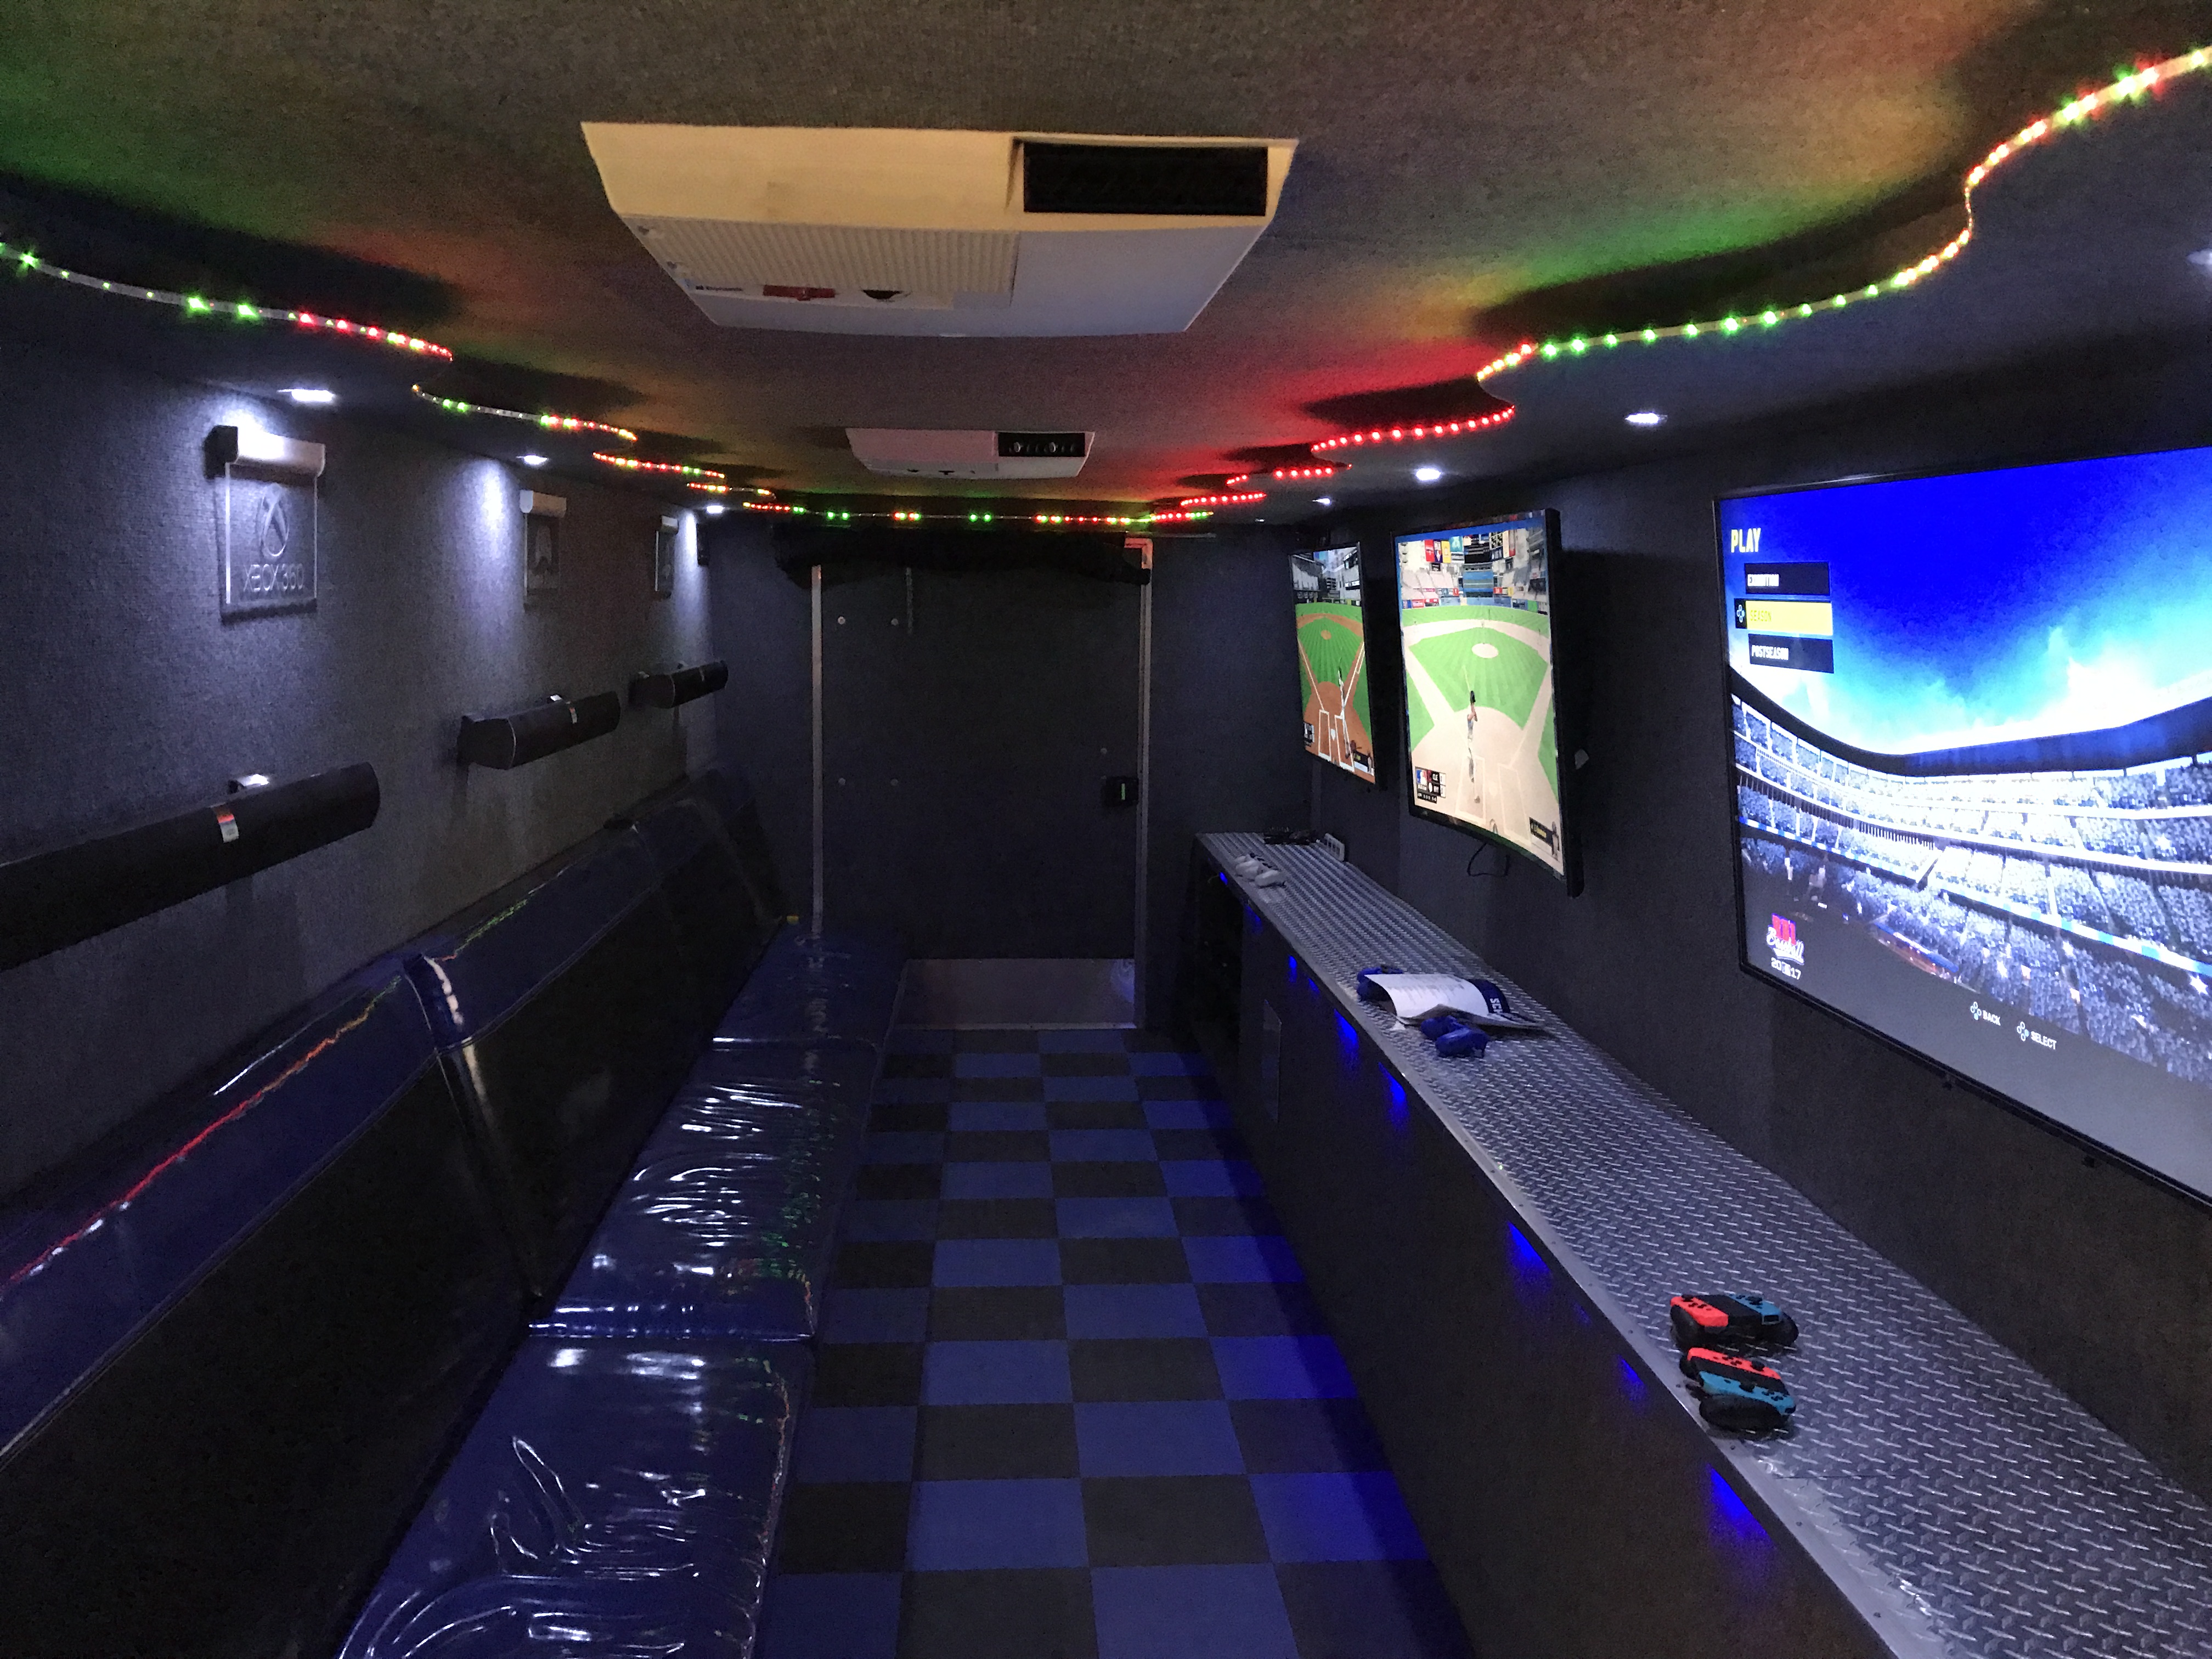 gaming truck rental cost